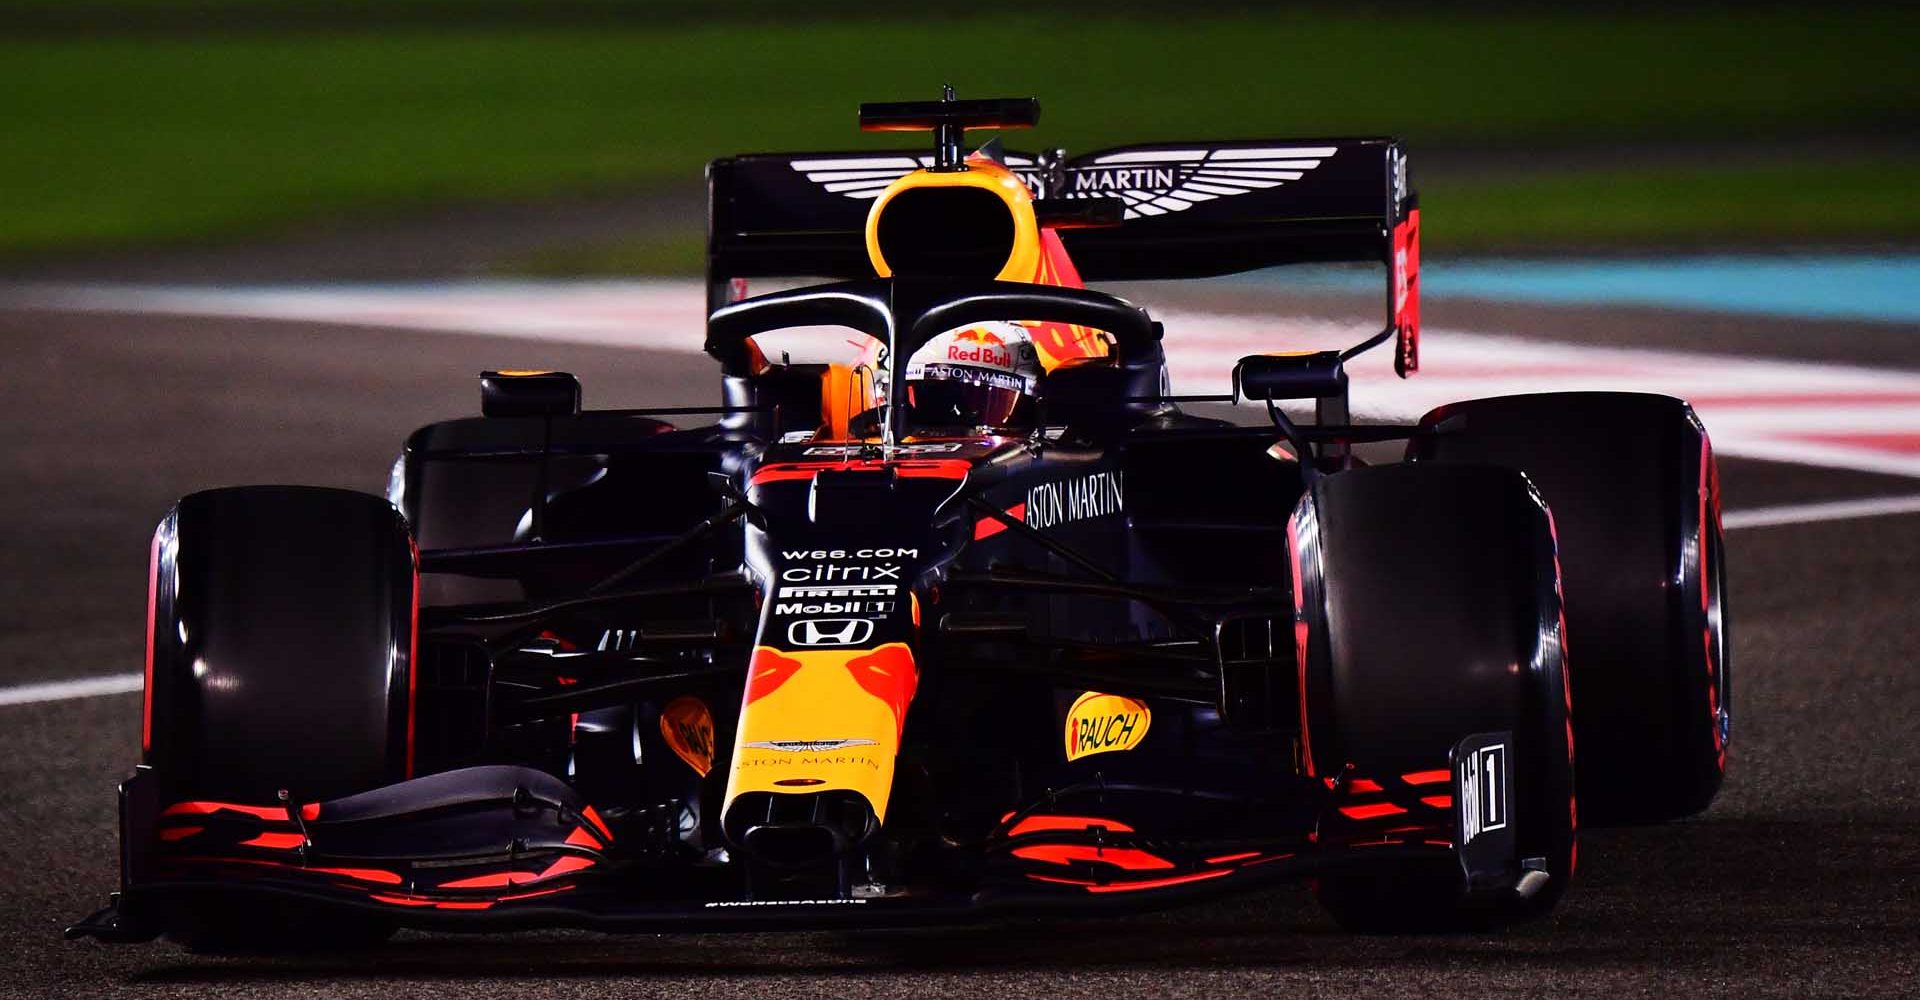 ABU DHABI, UNITED ARAB EMIRATES - DECEMBER 12: Max Verstappen of the Netherlands driving the (33) Aston Martin Red Bull Racing RB16 on track during qualifying ahead of the F1 Grand Prix of Abu Dhabi at Yas Marina Circuit on December 12, 2020 in Abu Dhabi, United Arab Emirates. (Photo by Giuseppe Cacace - Pool/Getty Images)